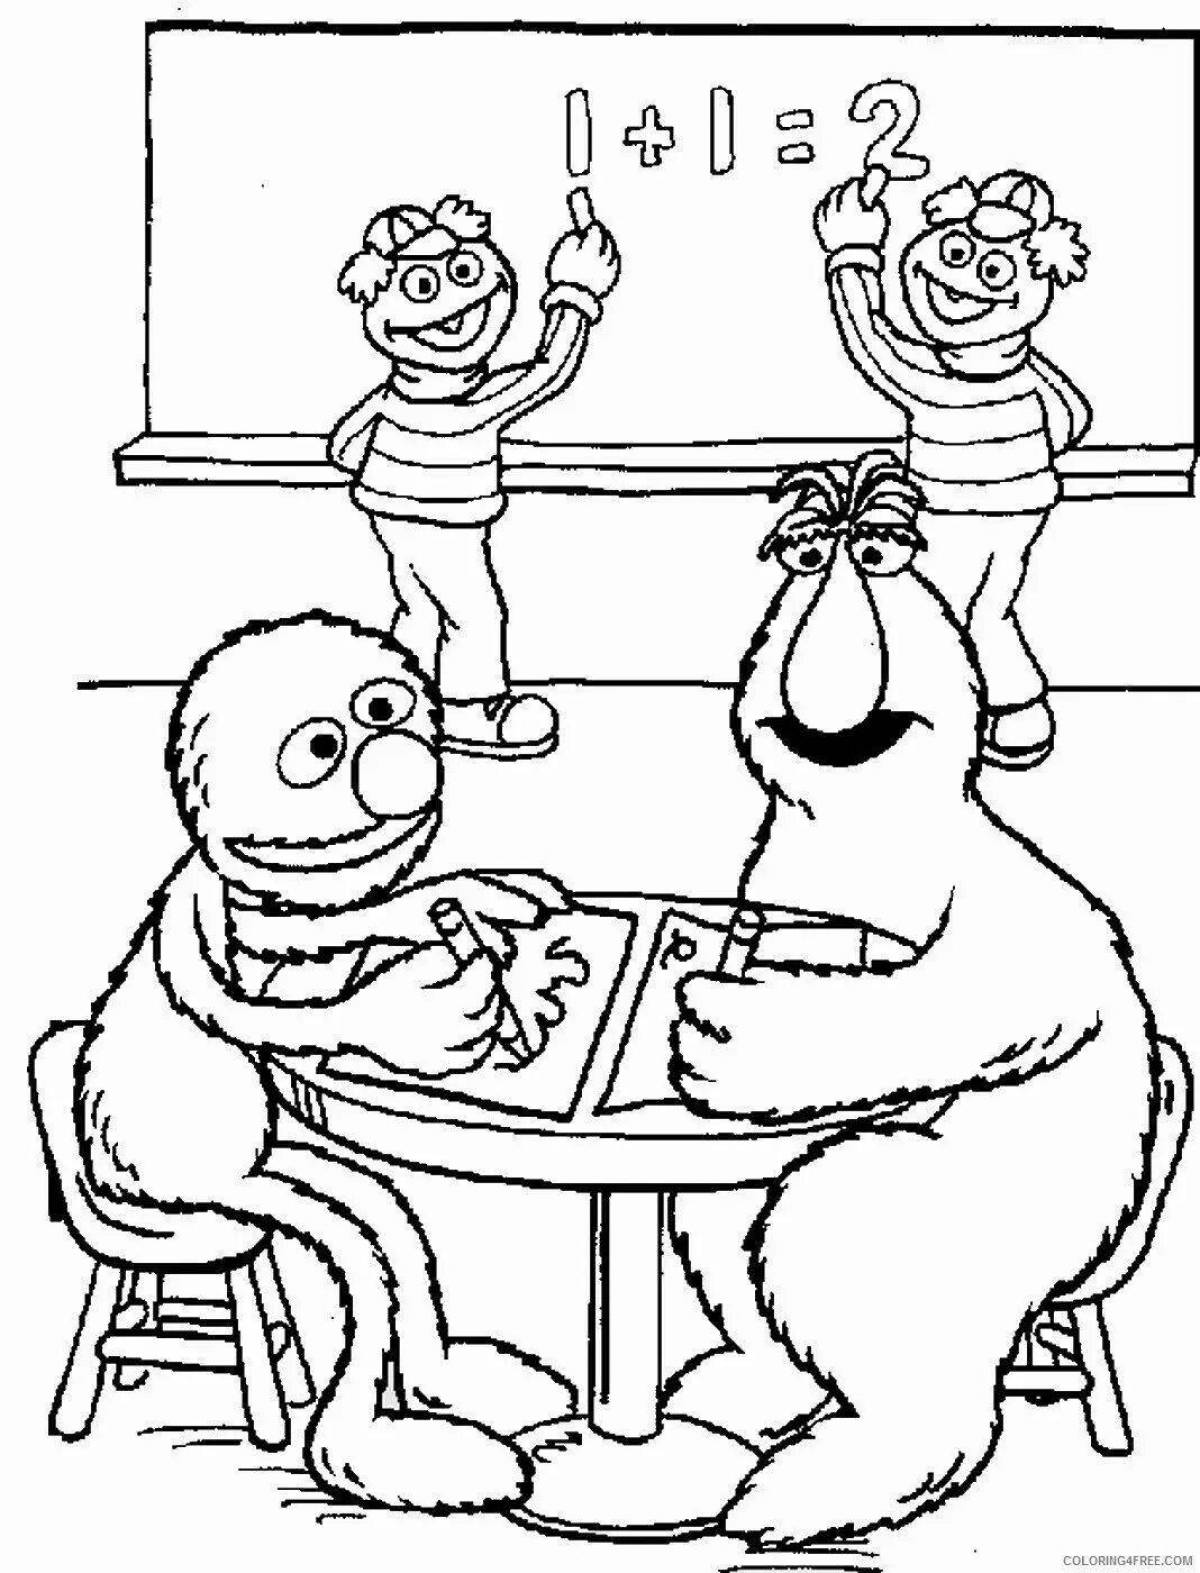 Colorful sesame street coloring page